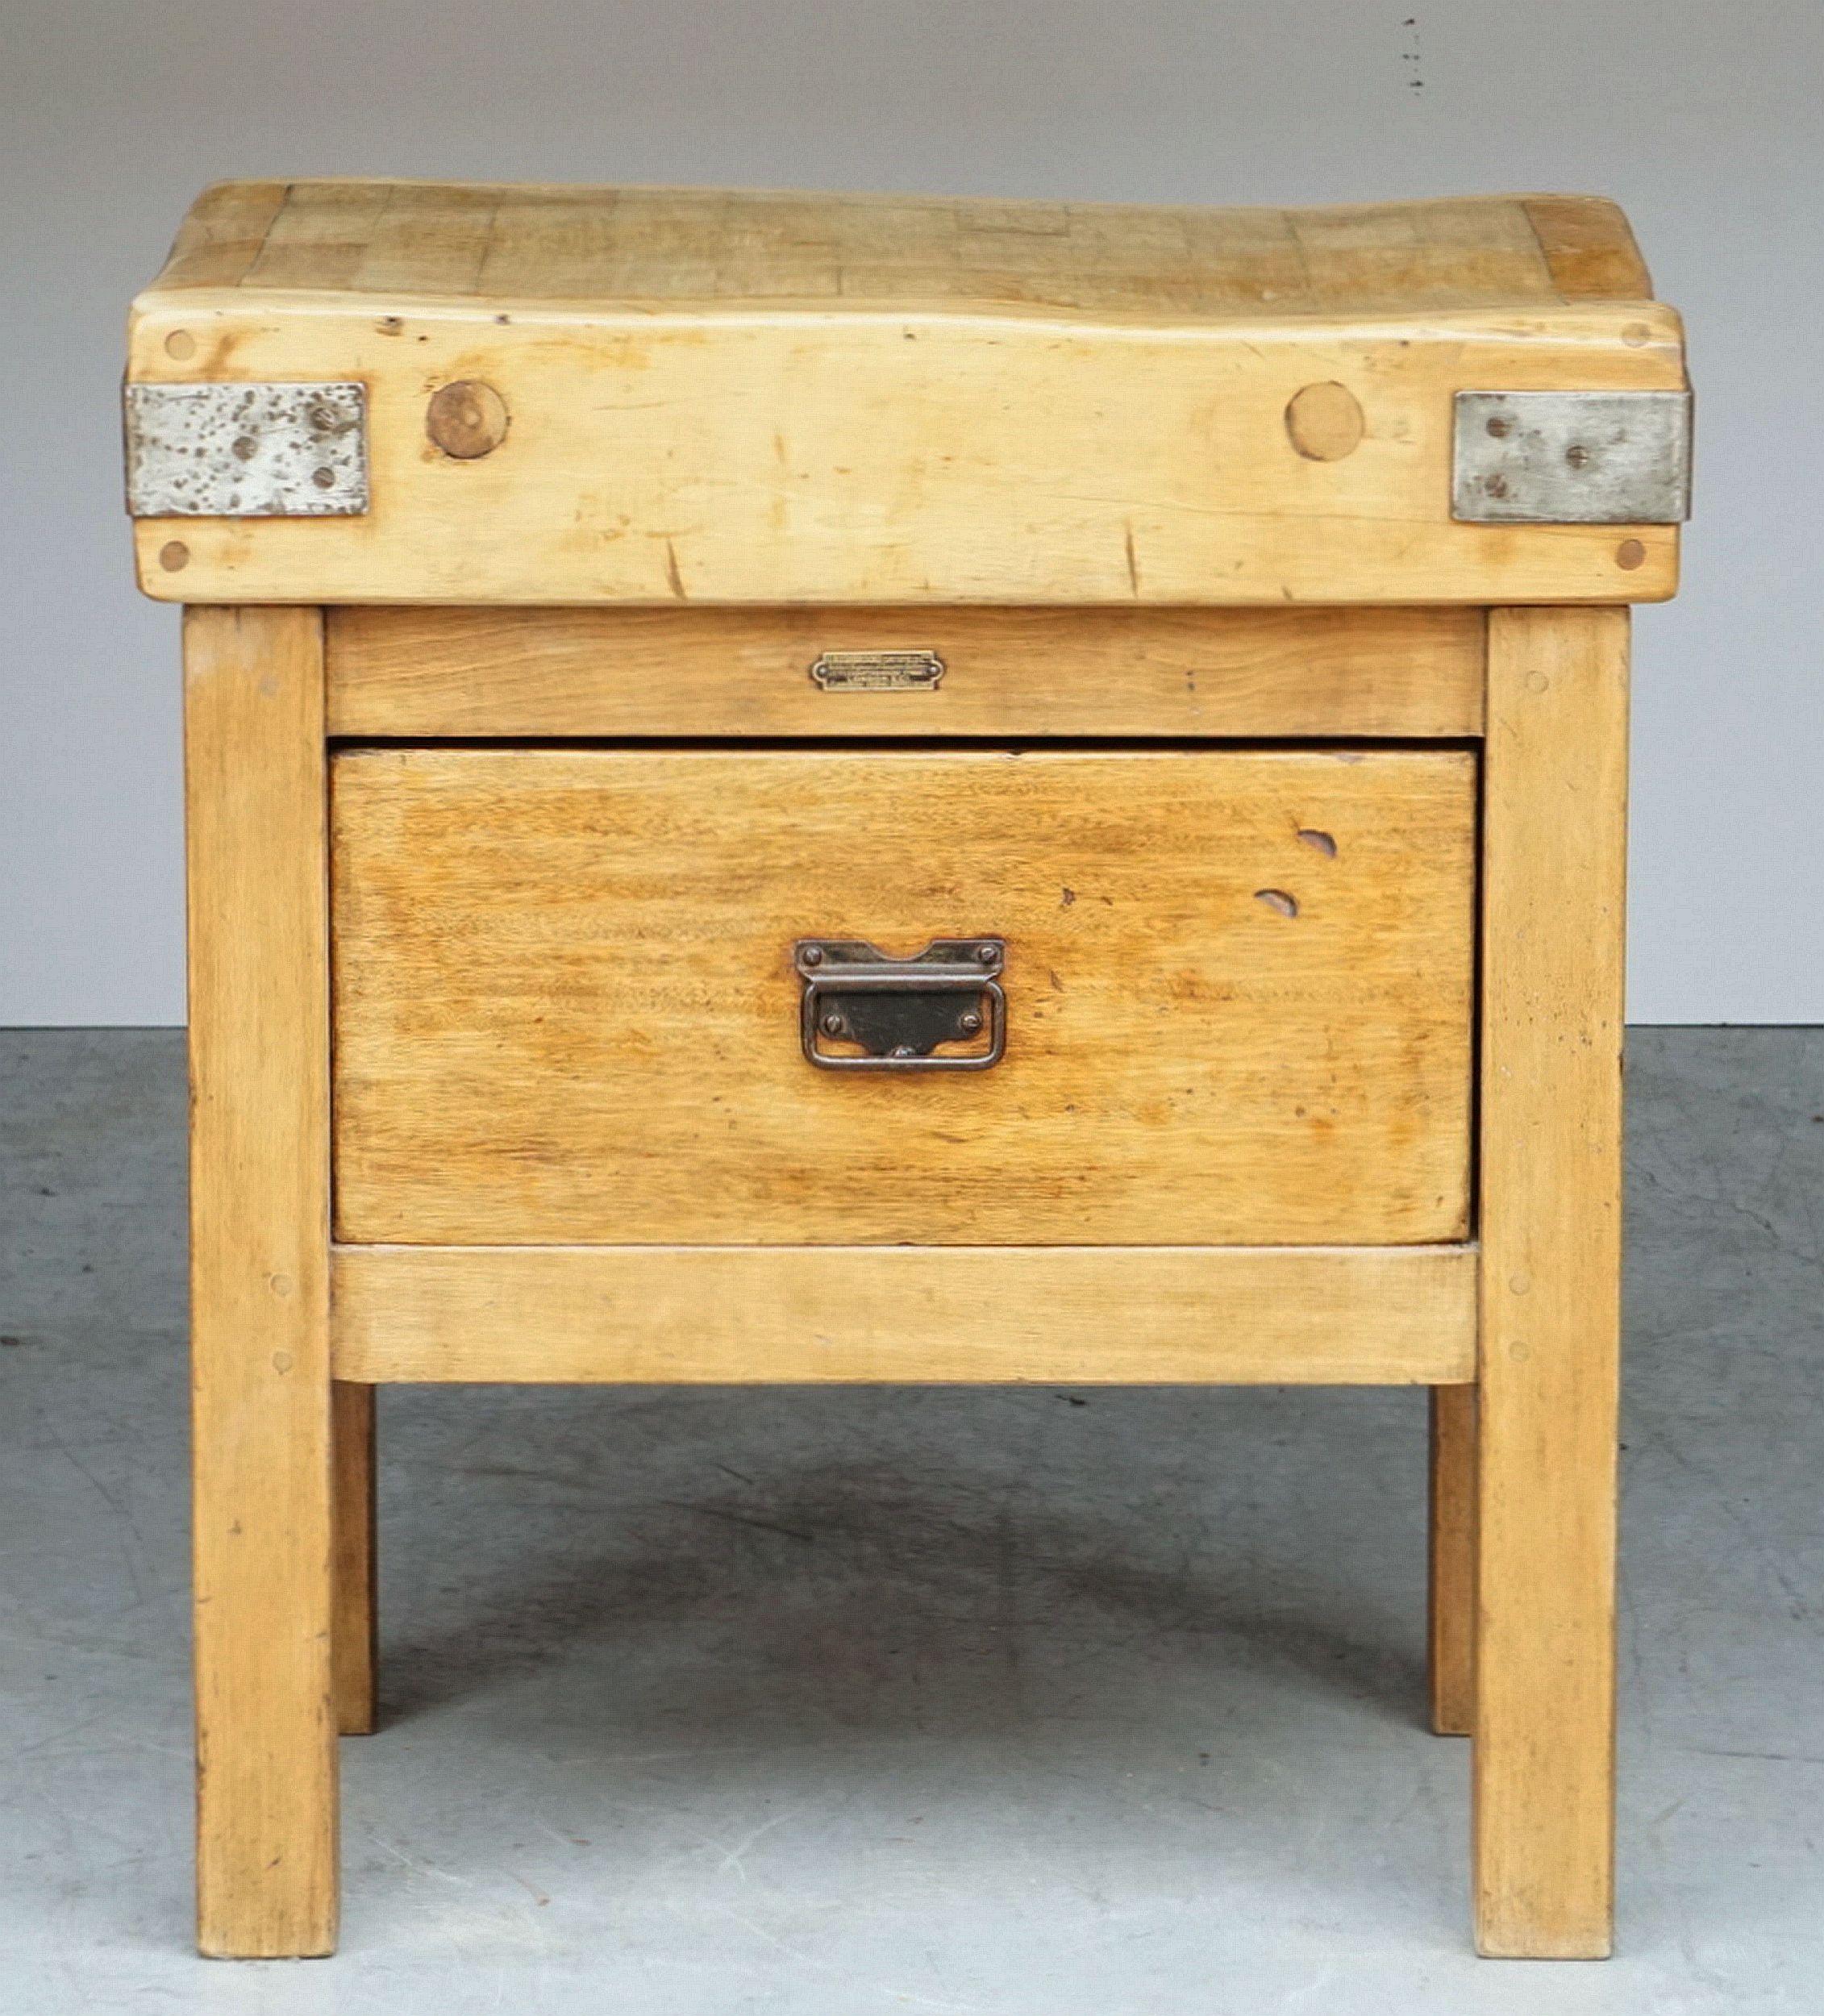 A two-tiered butcher's chopping block or table from England, featuring a large, rectangular sloping block or slab of iron-bound wood set upon a bottom tier four-legged, paneled support stand of pine, with fitted drawer and pull handles, the drawer